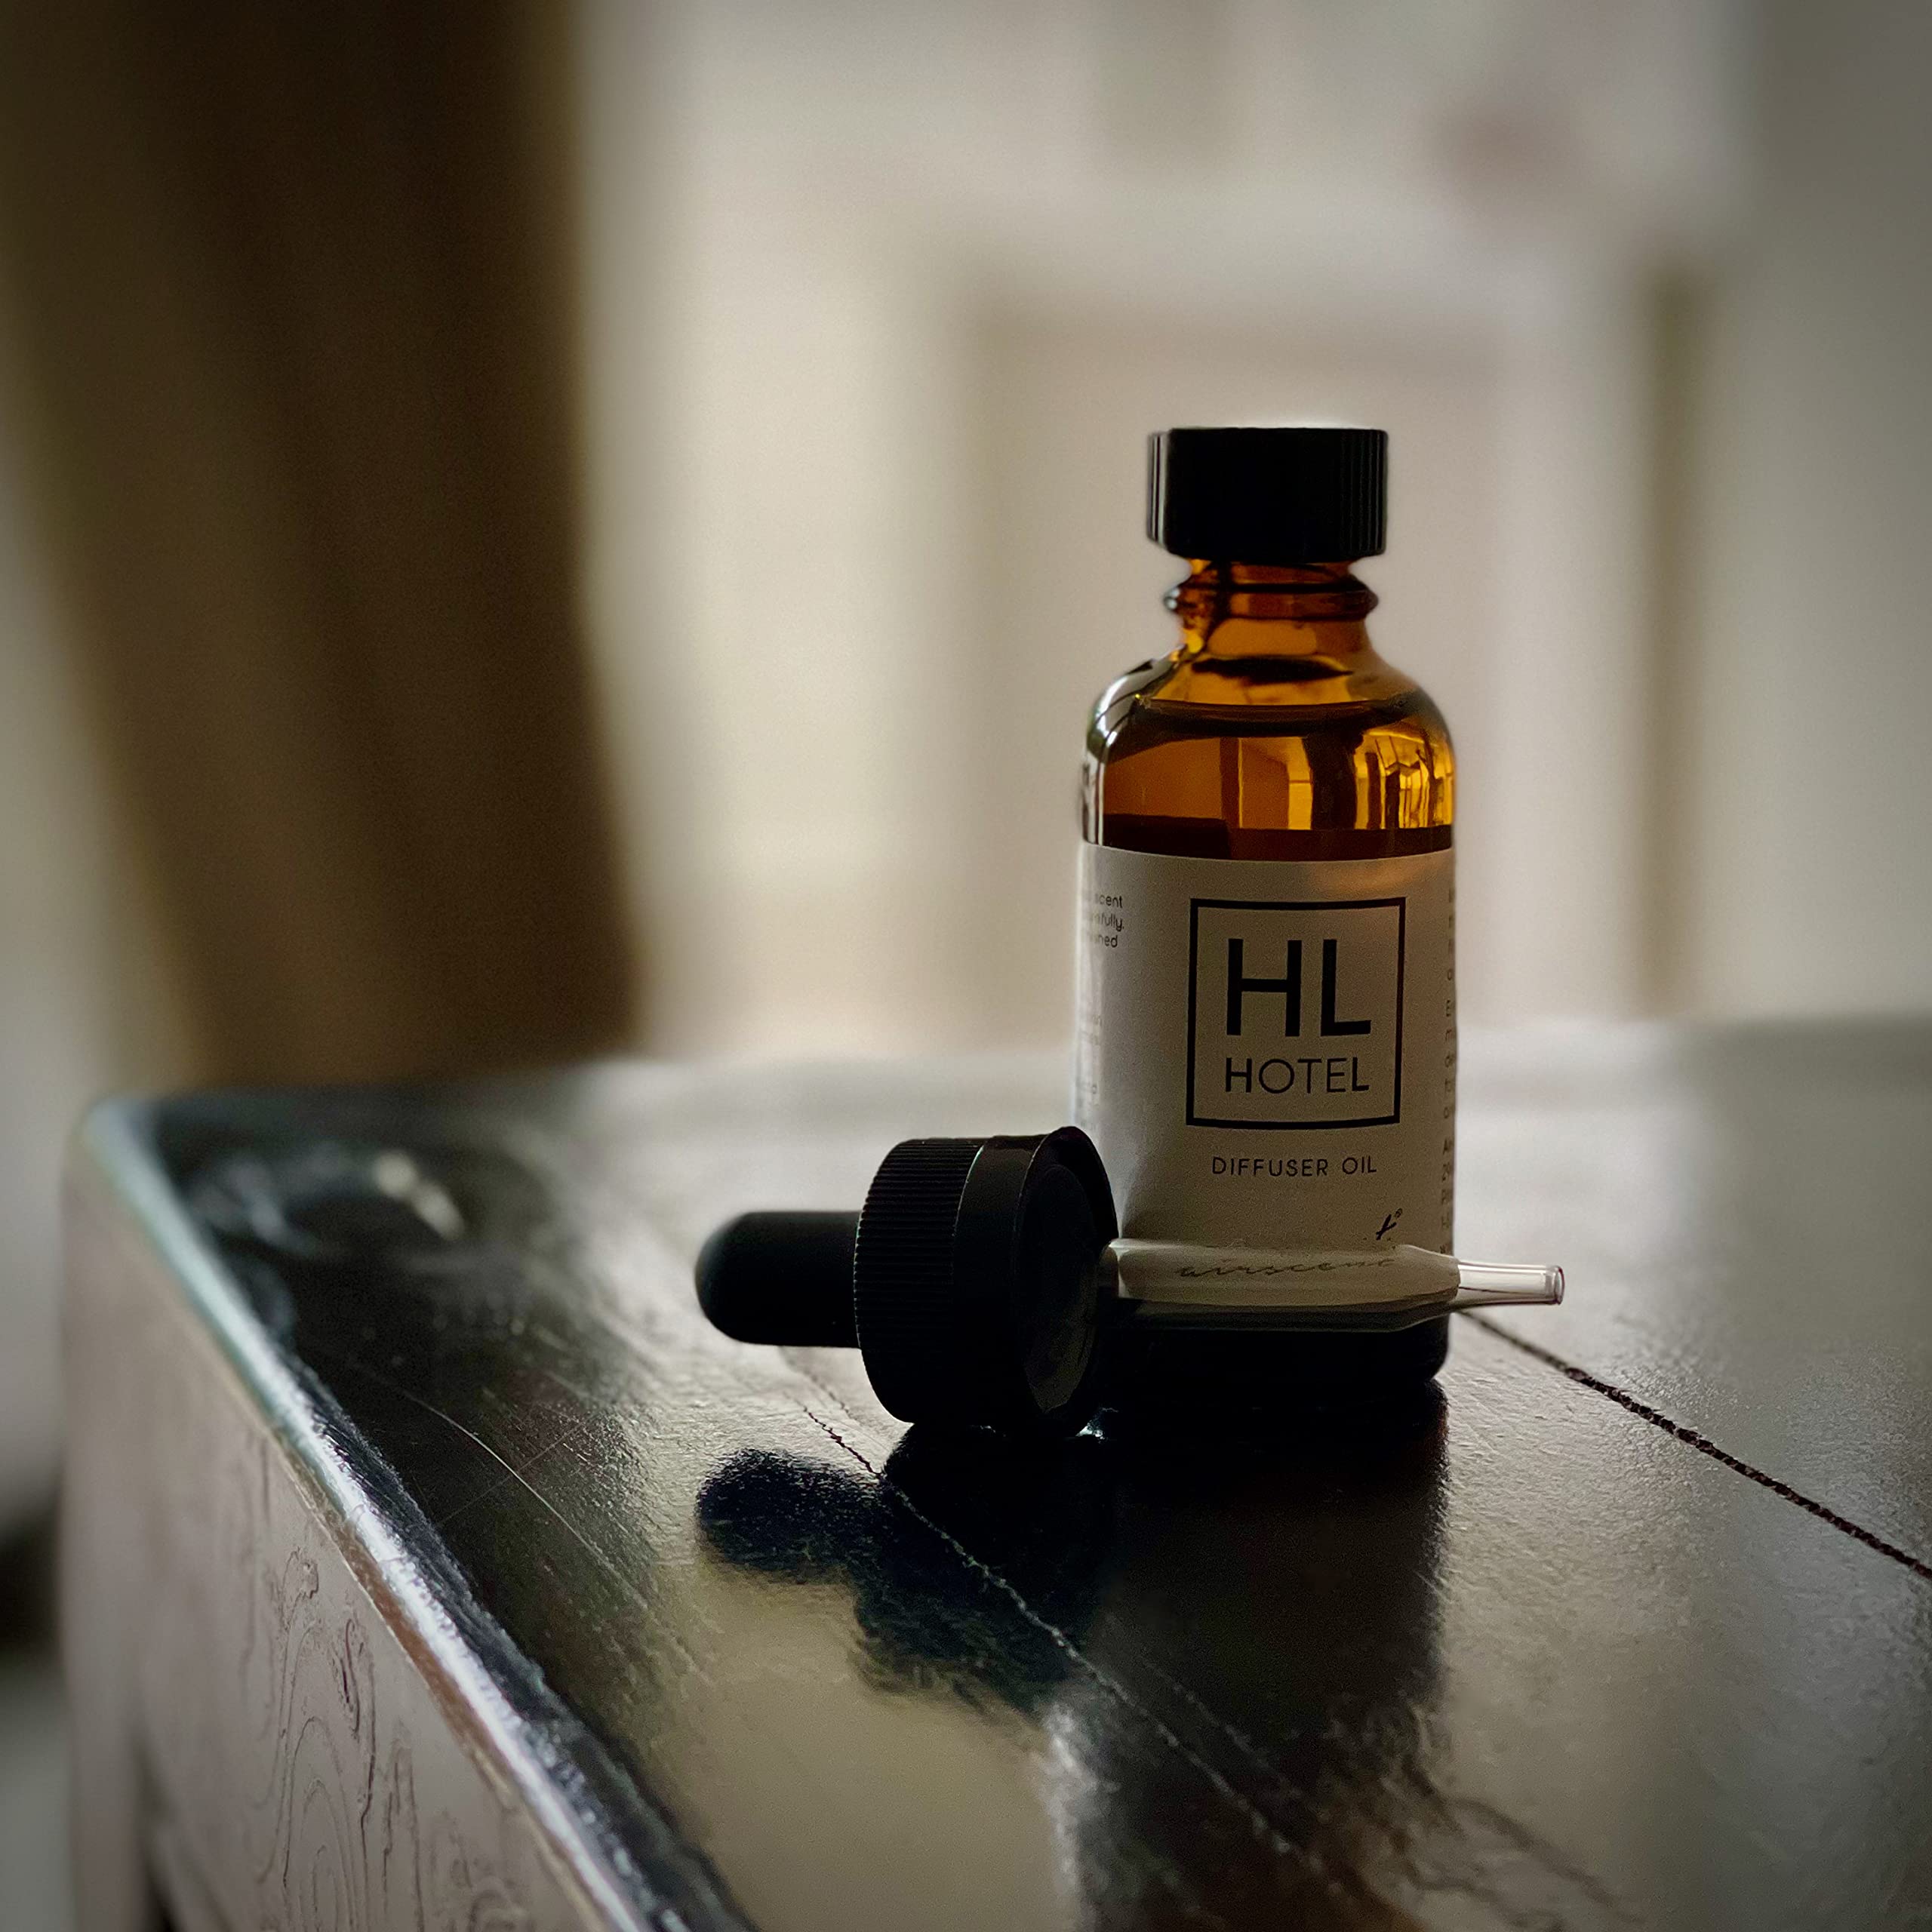 Hotel Diffuser Oil Air-Scent Fragrance for Aroma Oil Diffusers - 10 Milliliter (.34 oz) Bottle with Dropper